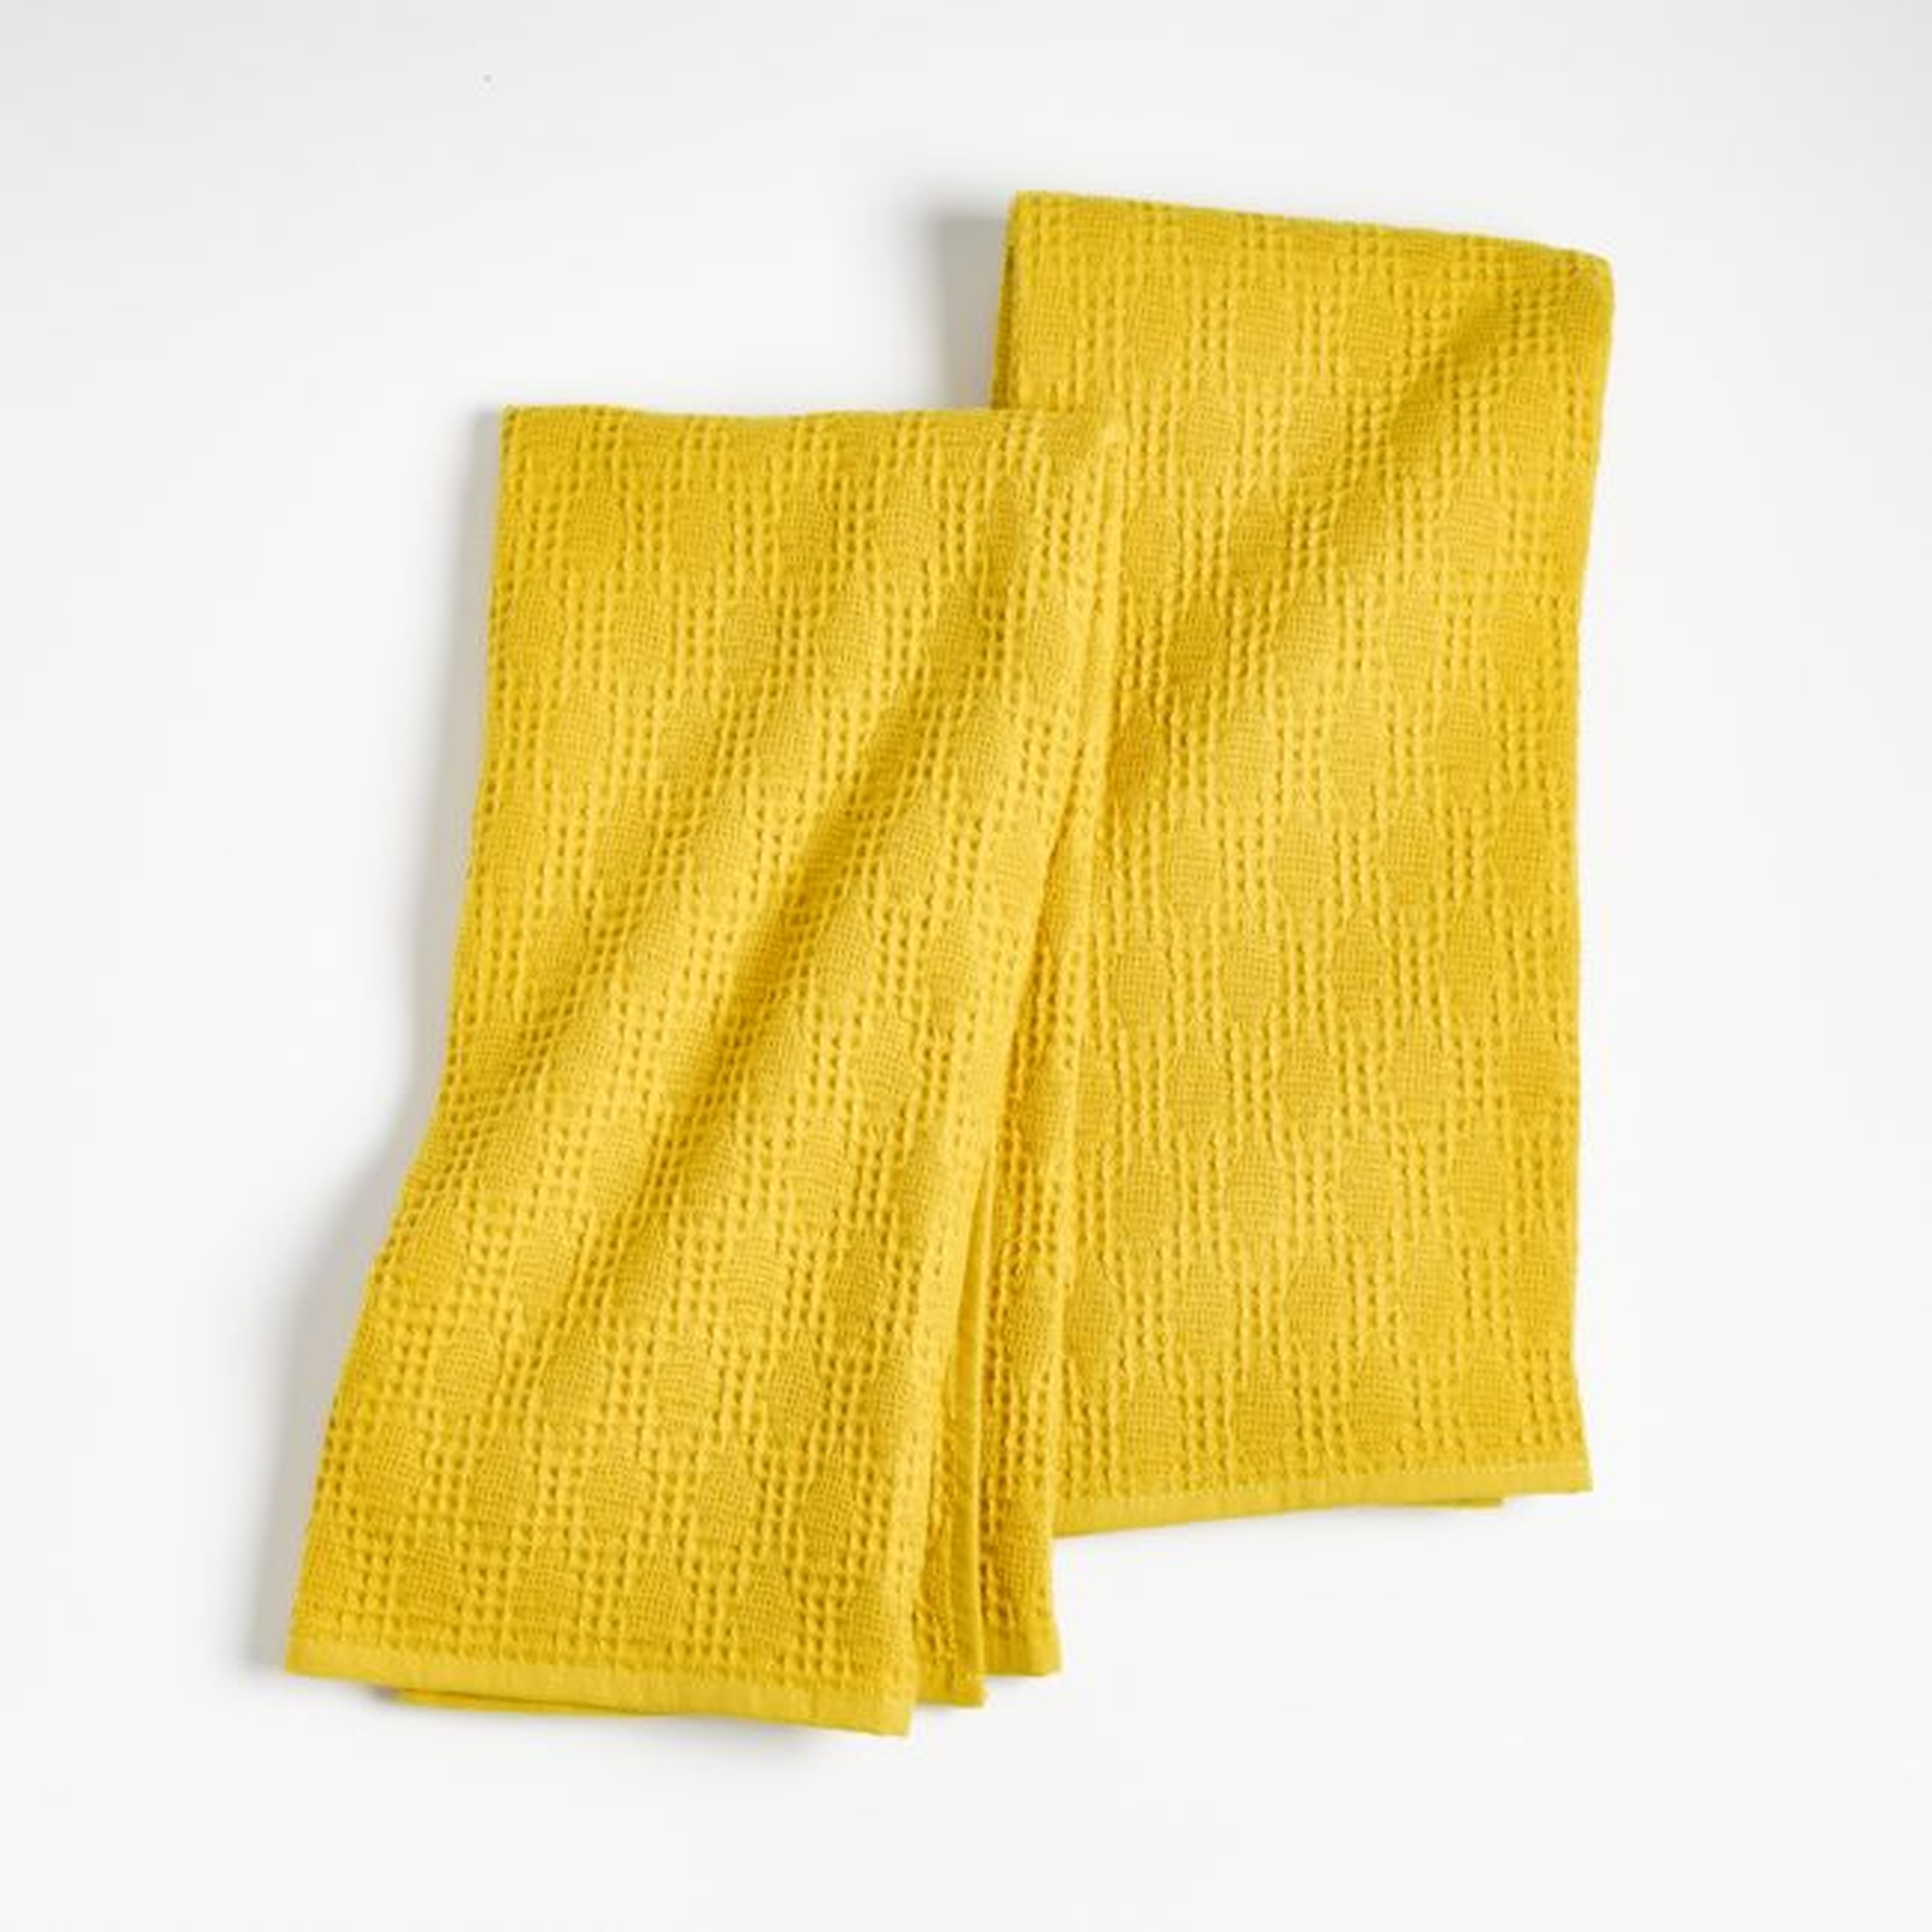 Diamond Pique Yellow Dish Towels, Set of 2 - Crate and Barrel